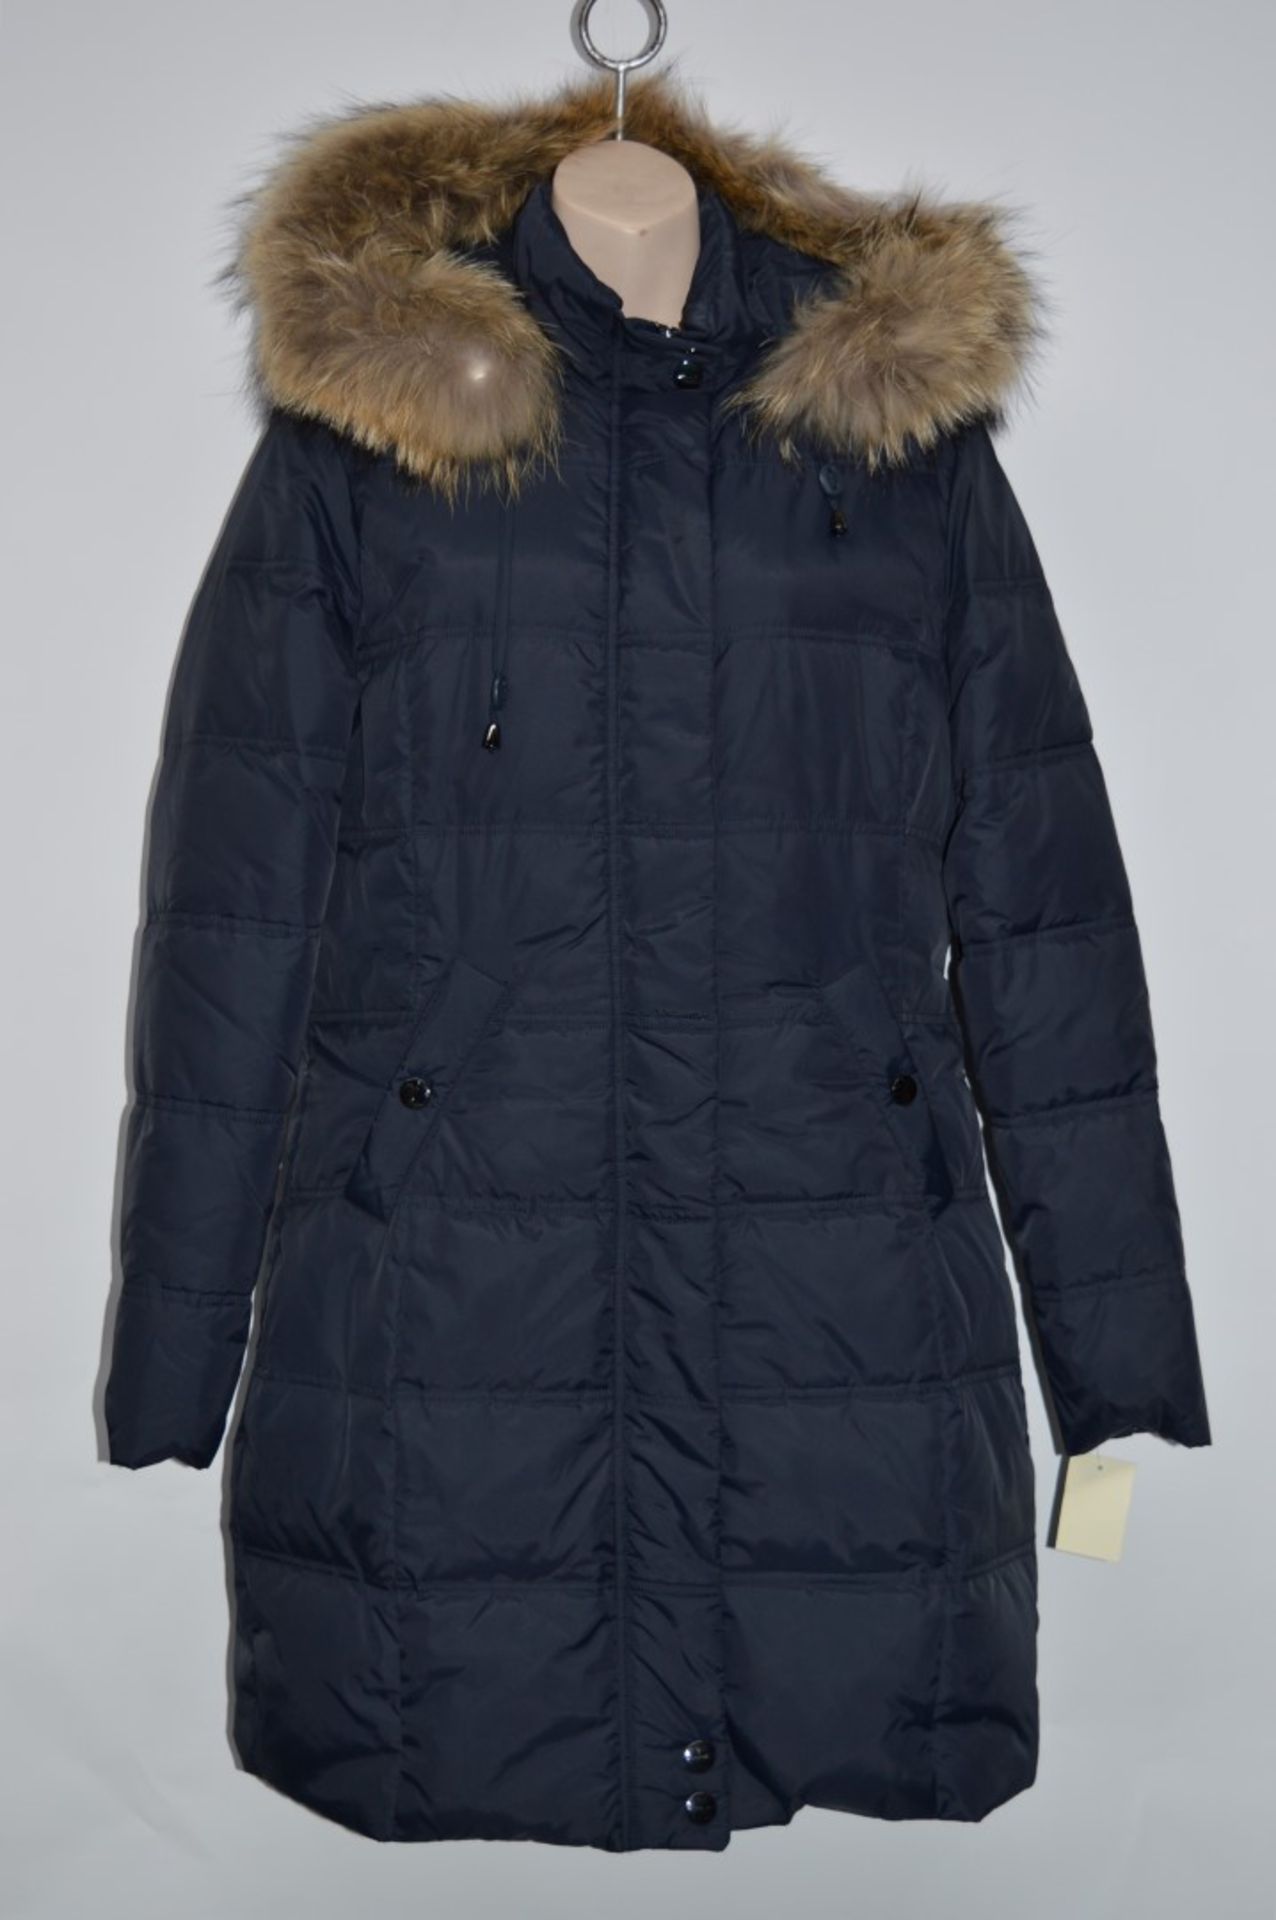 1 x Steilmann Womens Parker Coat - Real Down Feather Filled Coat With Functional Pockets, Inner